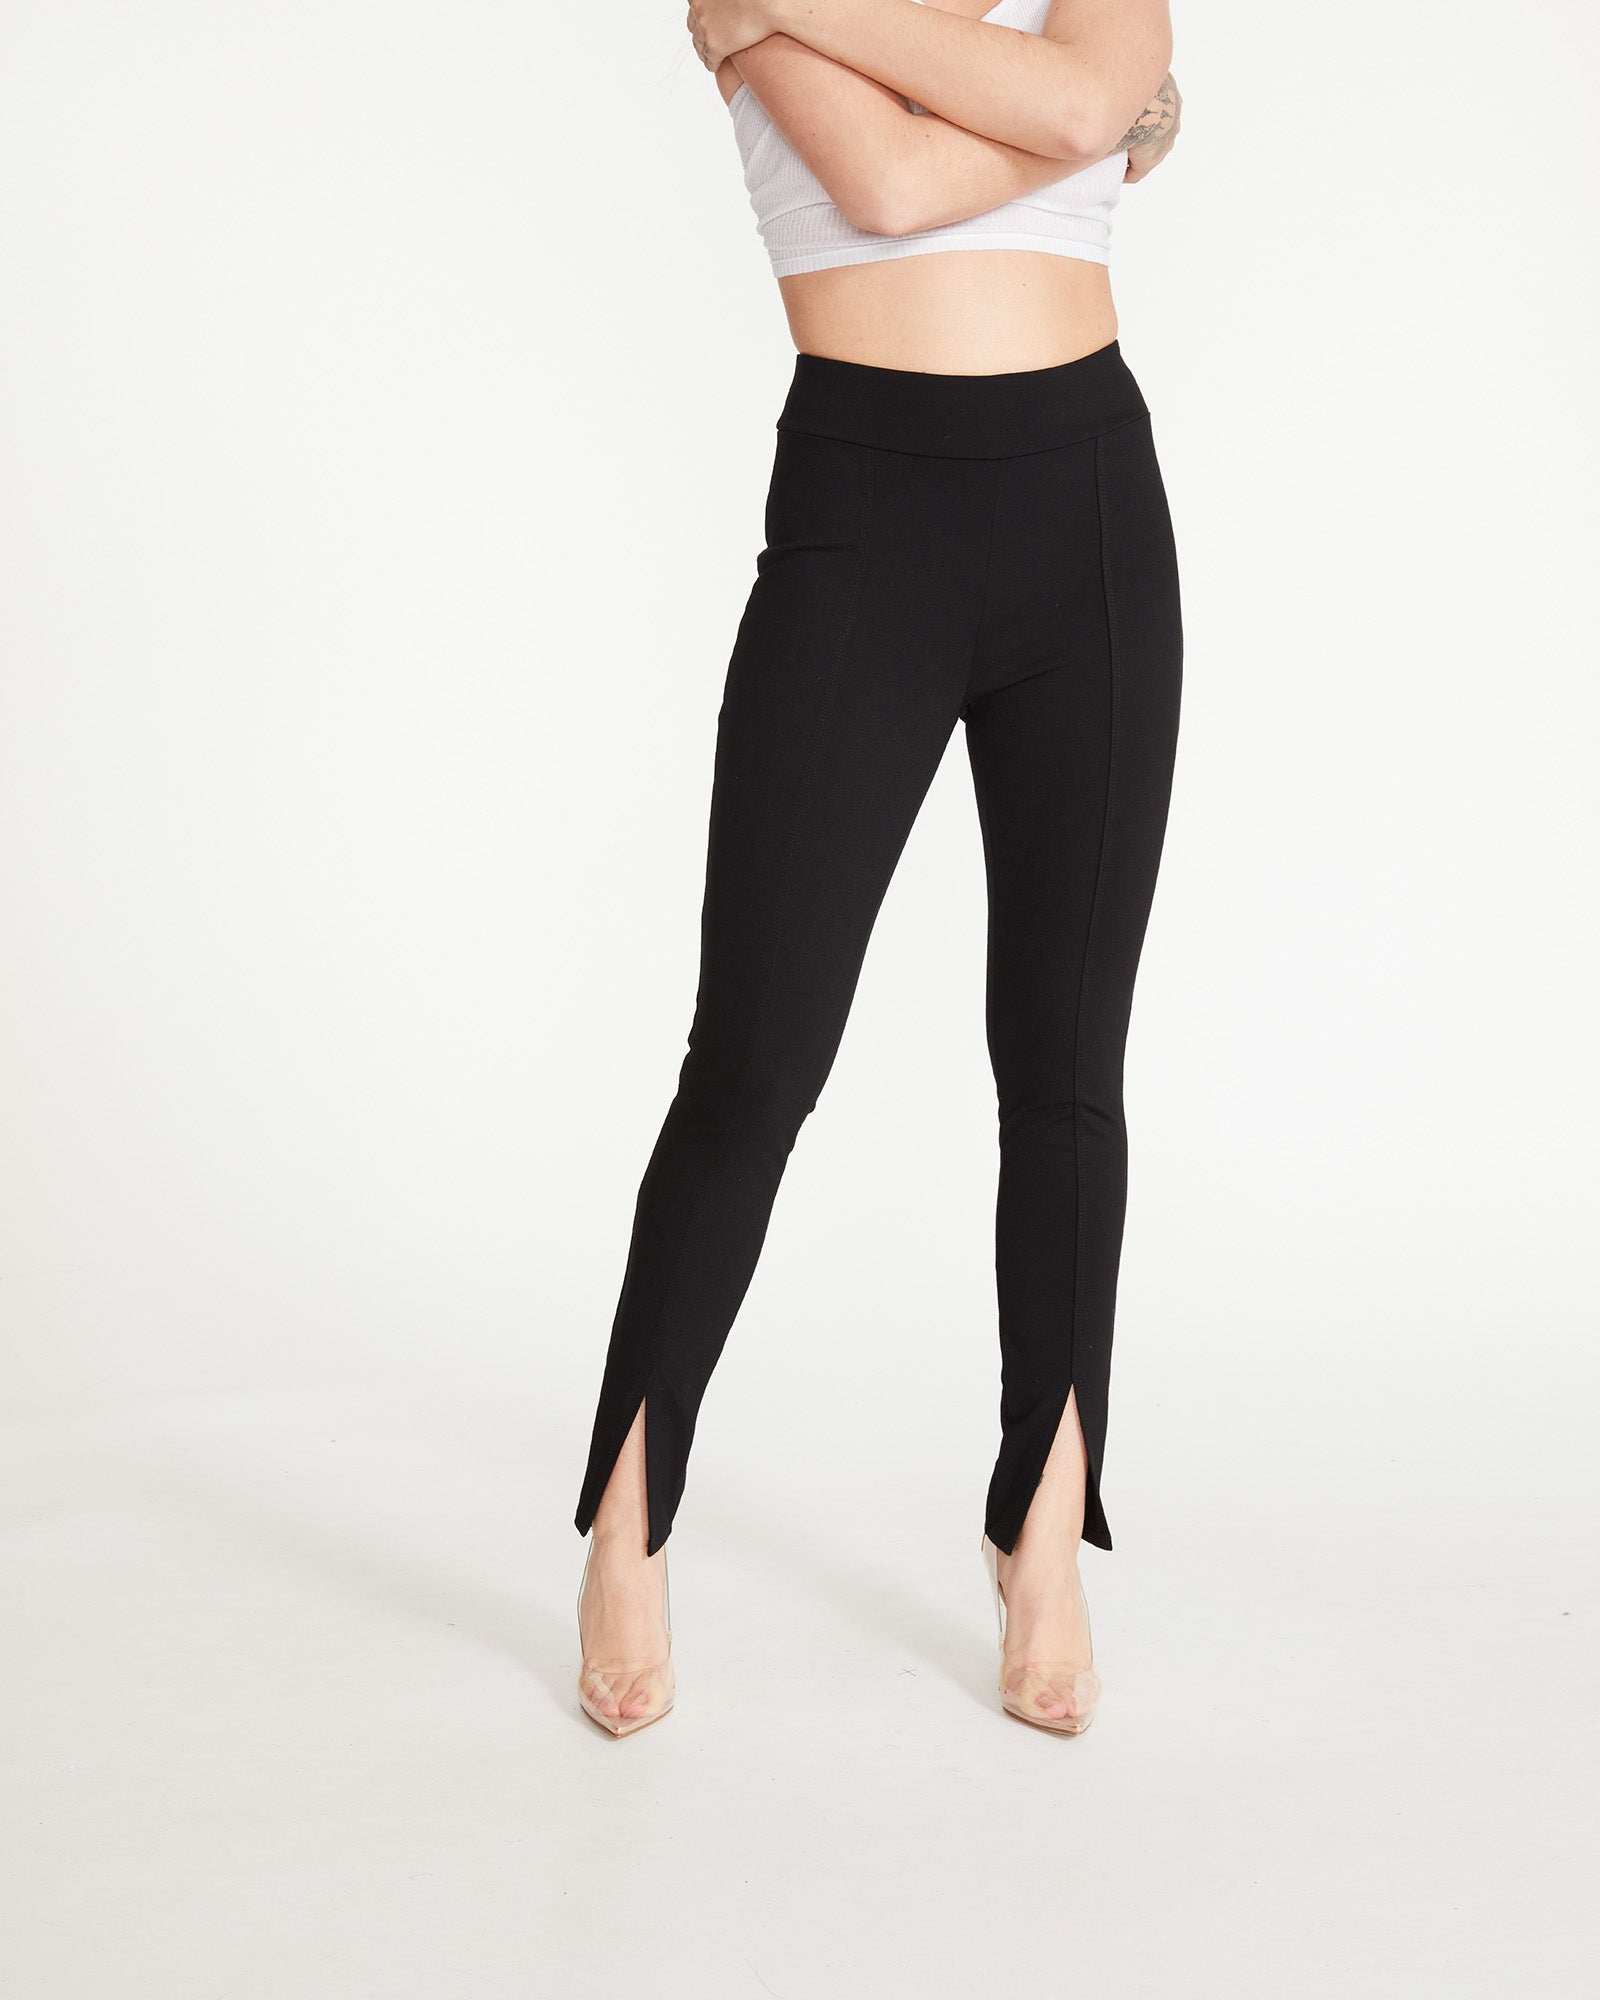 Women’s black leggings with mixed stitching